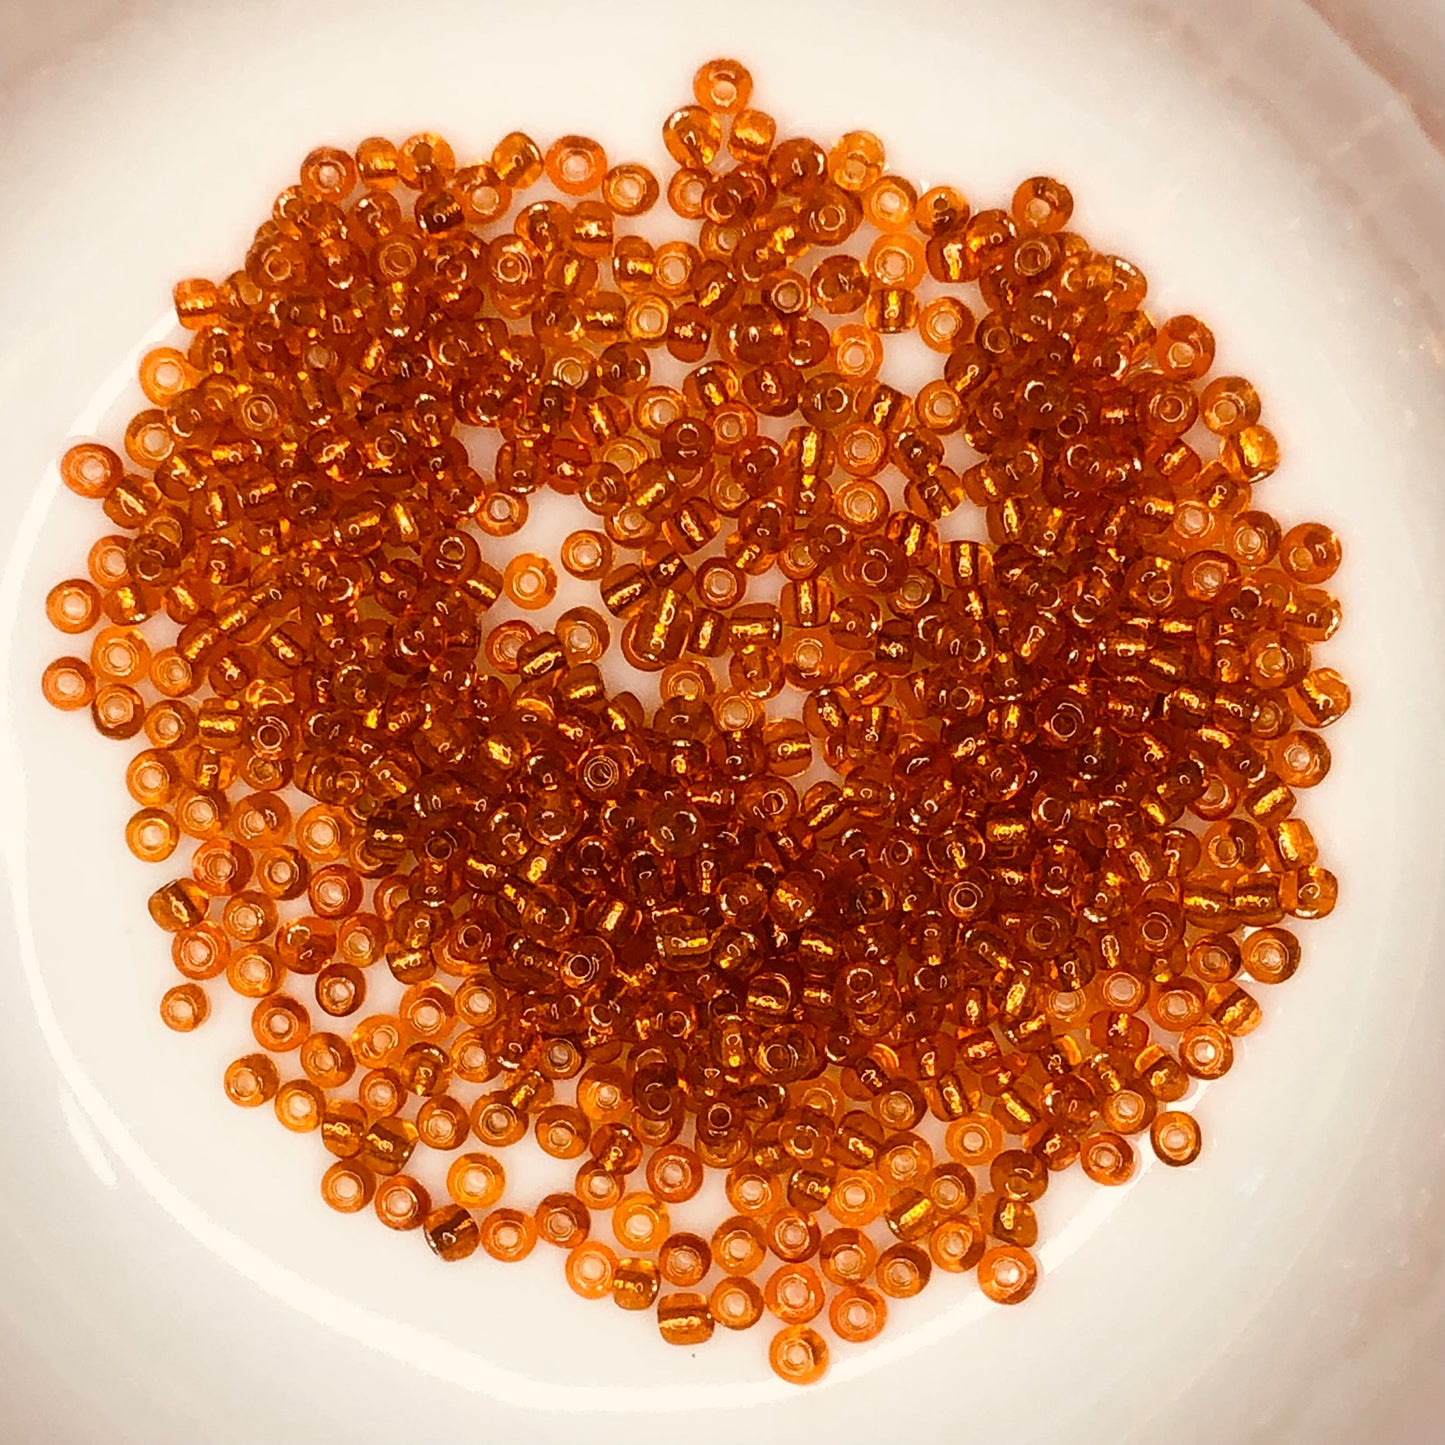 8/0 Silver Lined Transparent Orange Seed Beads - 2.65 or 5 gm